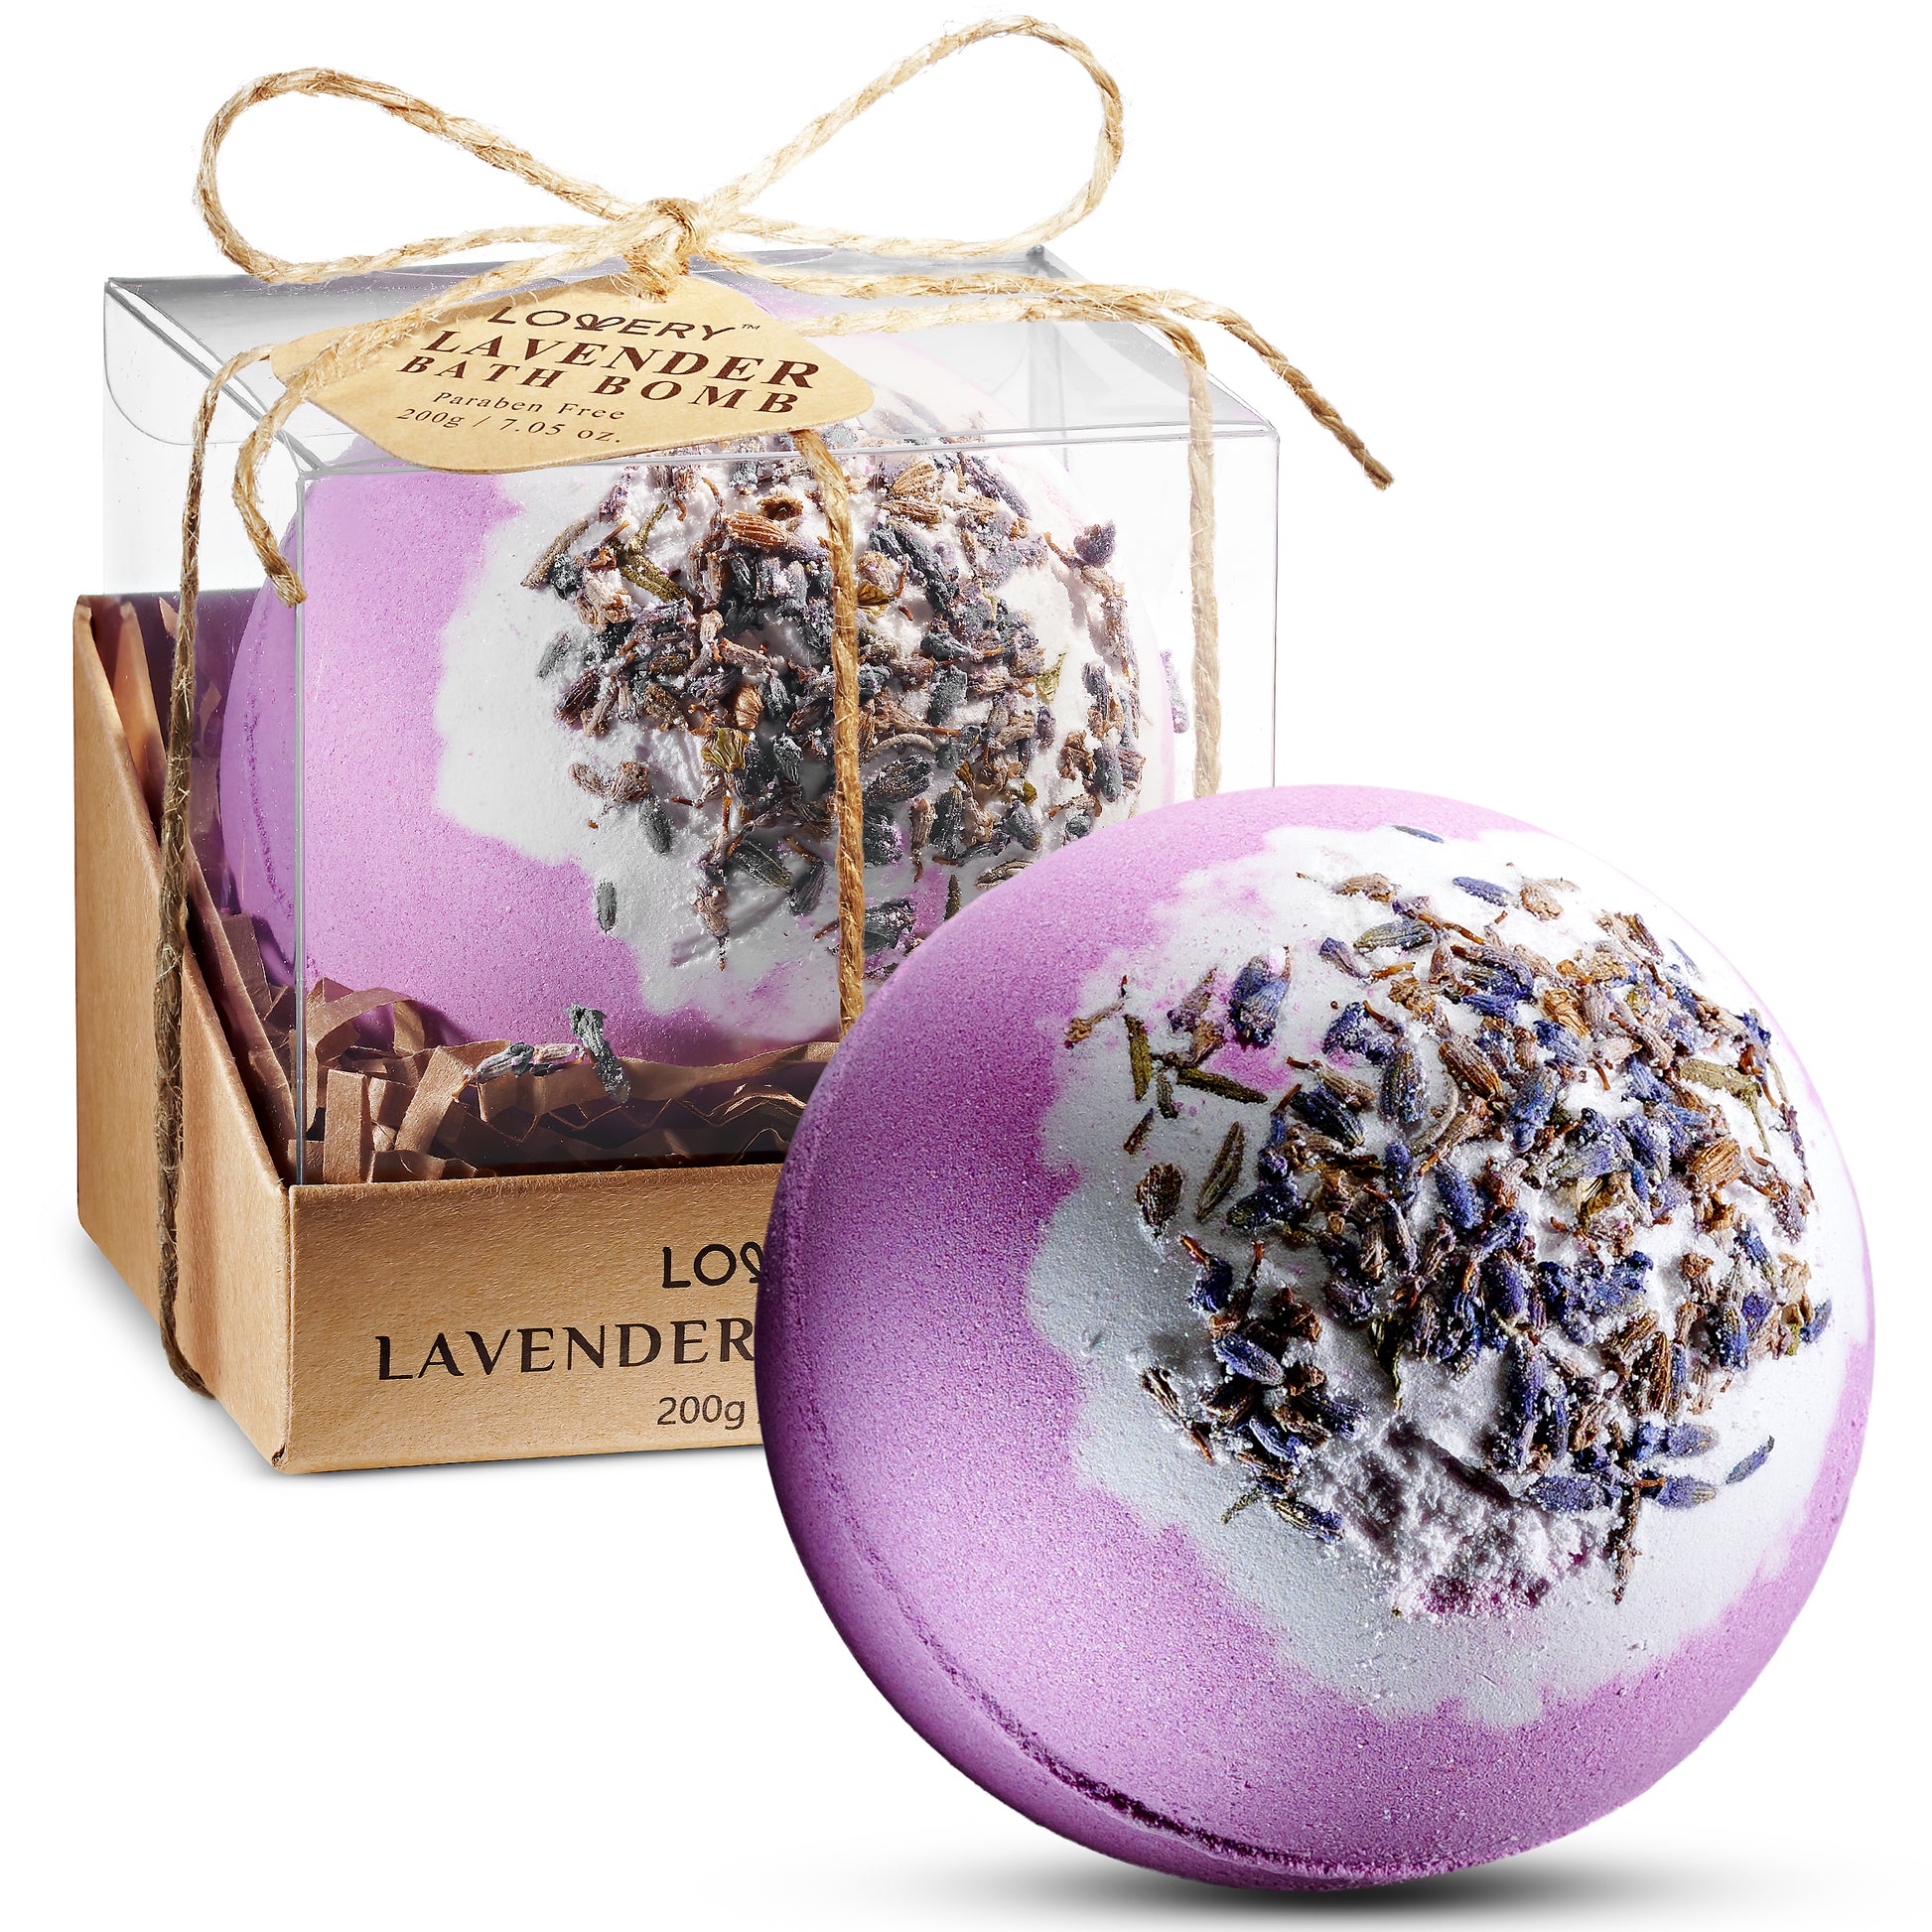  lovery Lavender Bath Bomb, Lavender Bath Bomb, Fizzy Spa Bliss, Handmade Bubble Spa Ball, relaxing Lavender, Stress Relief Bath Fizz, Soothing Zen Experience, Anti-Inflammatory Lavender Oil Benefits, Skin Soothing, Redness Reduction, Calms Itchy Rashes, Antifungal Spa, Nourishing Bath Essentials, Vitamin E, Shea Butter, Jojoba Oil Spa, Cruelty-Free, Paraben-Free, Lavender Bath Bomb Love, Vegan-Friendly, Handmade Self-Care Delight